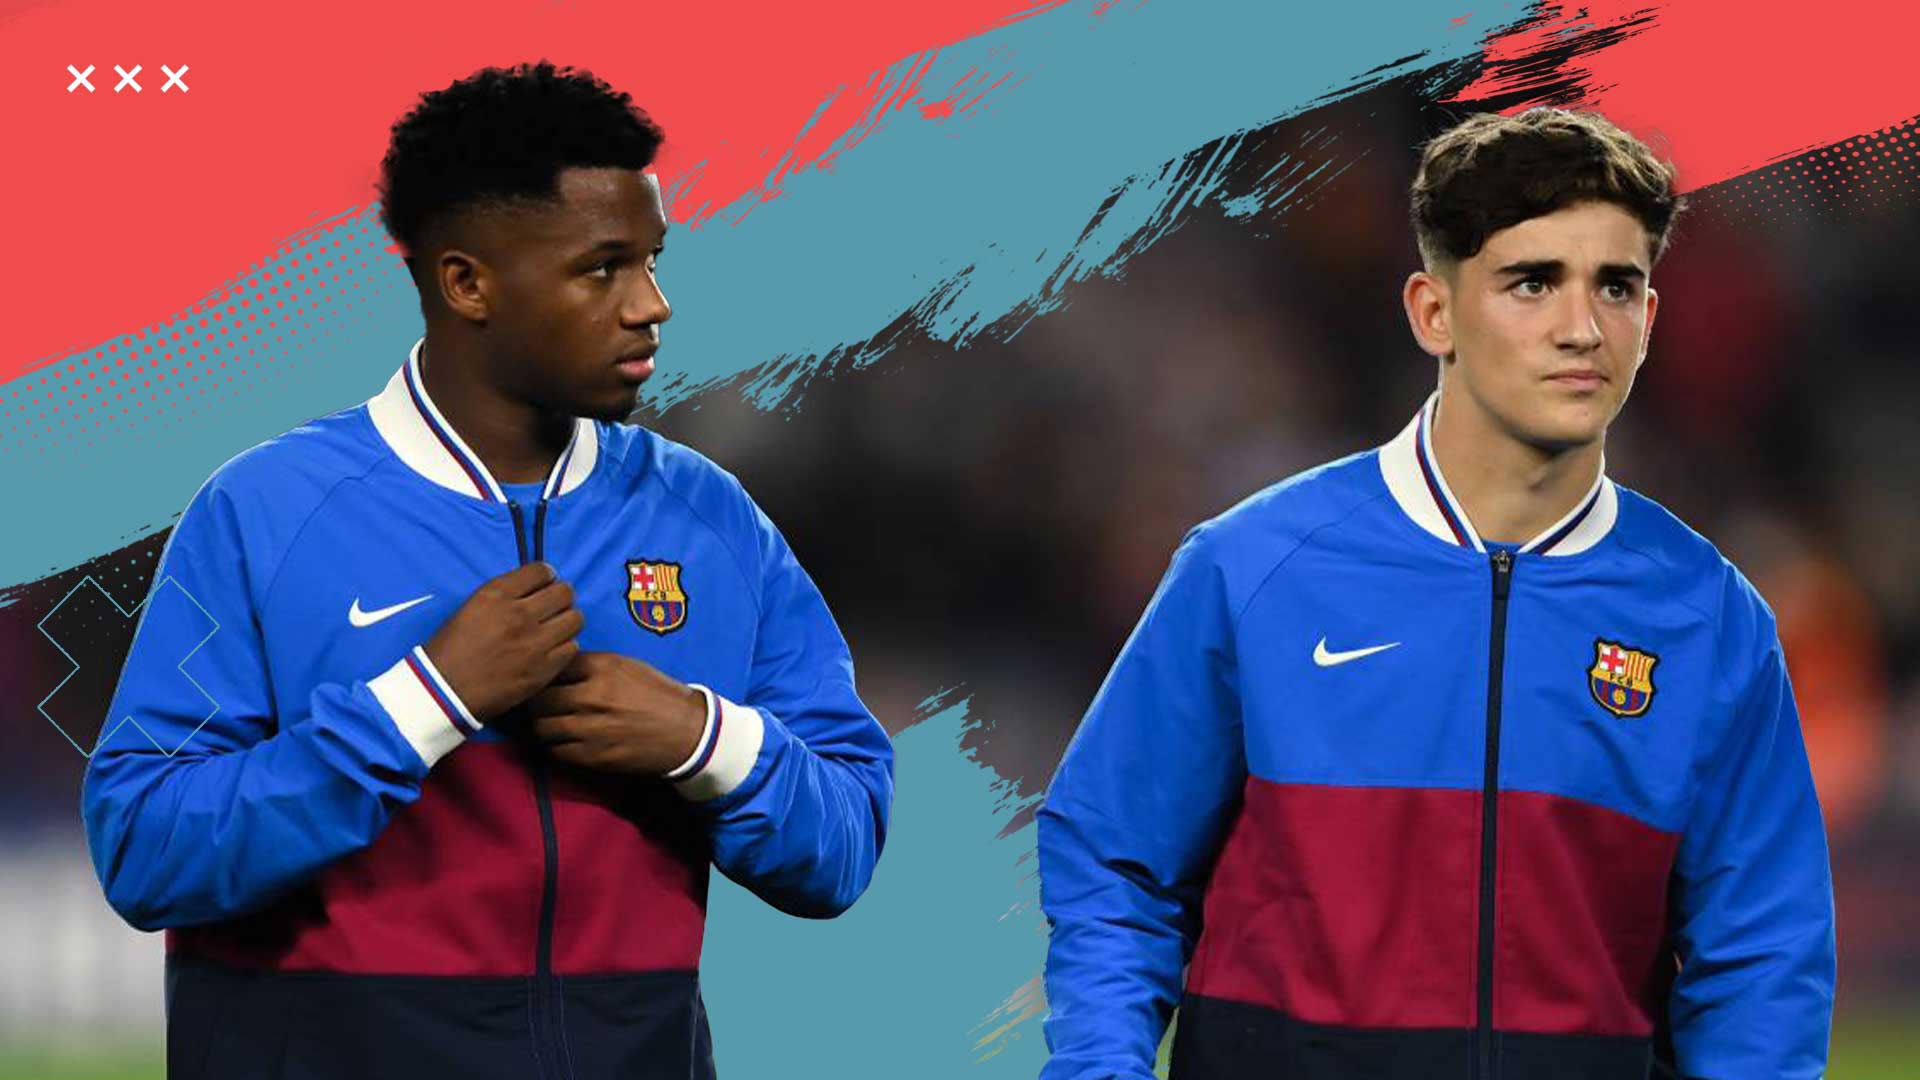 Barcelona’s Injury Epidemic: What’s Going Wrong?